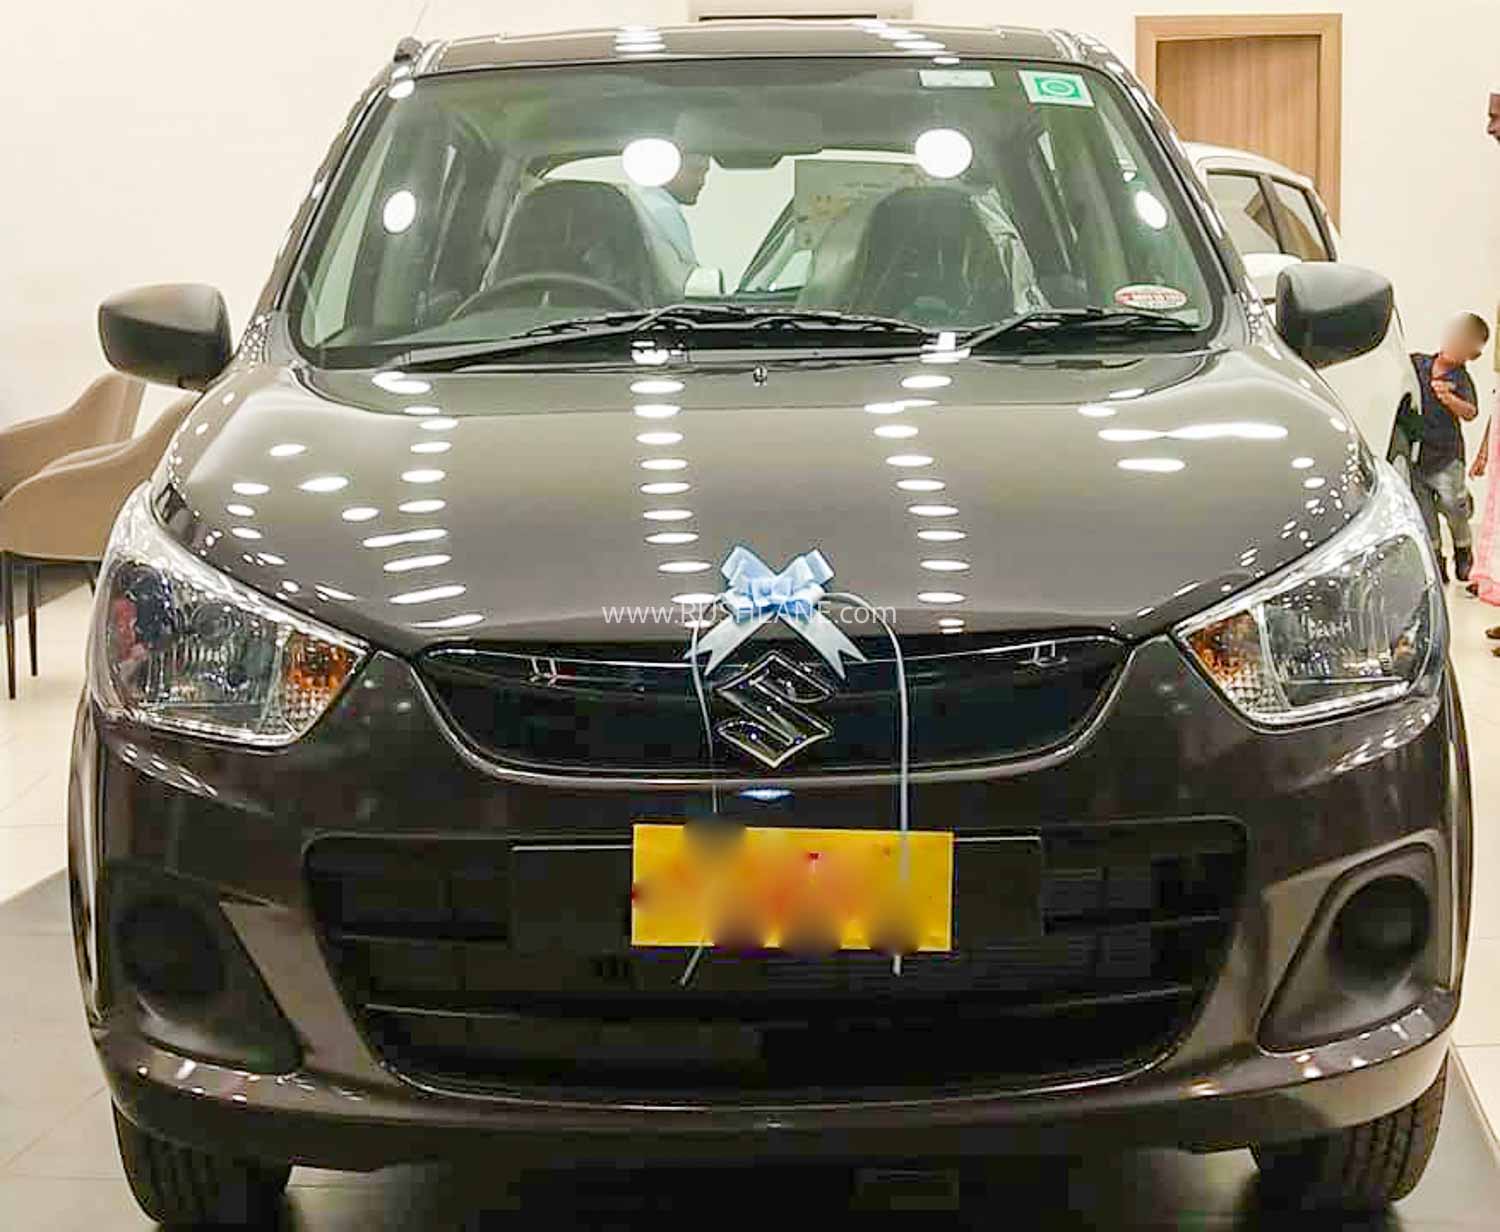 Maruti Alto K10 Goes Out Of Stock Has It Been Discontinued